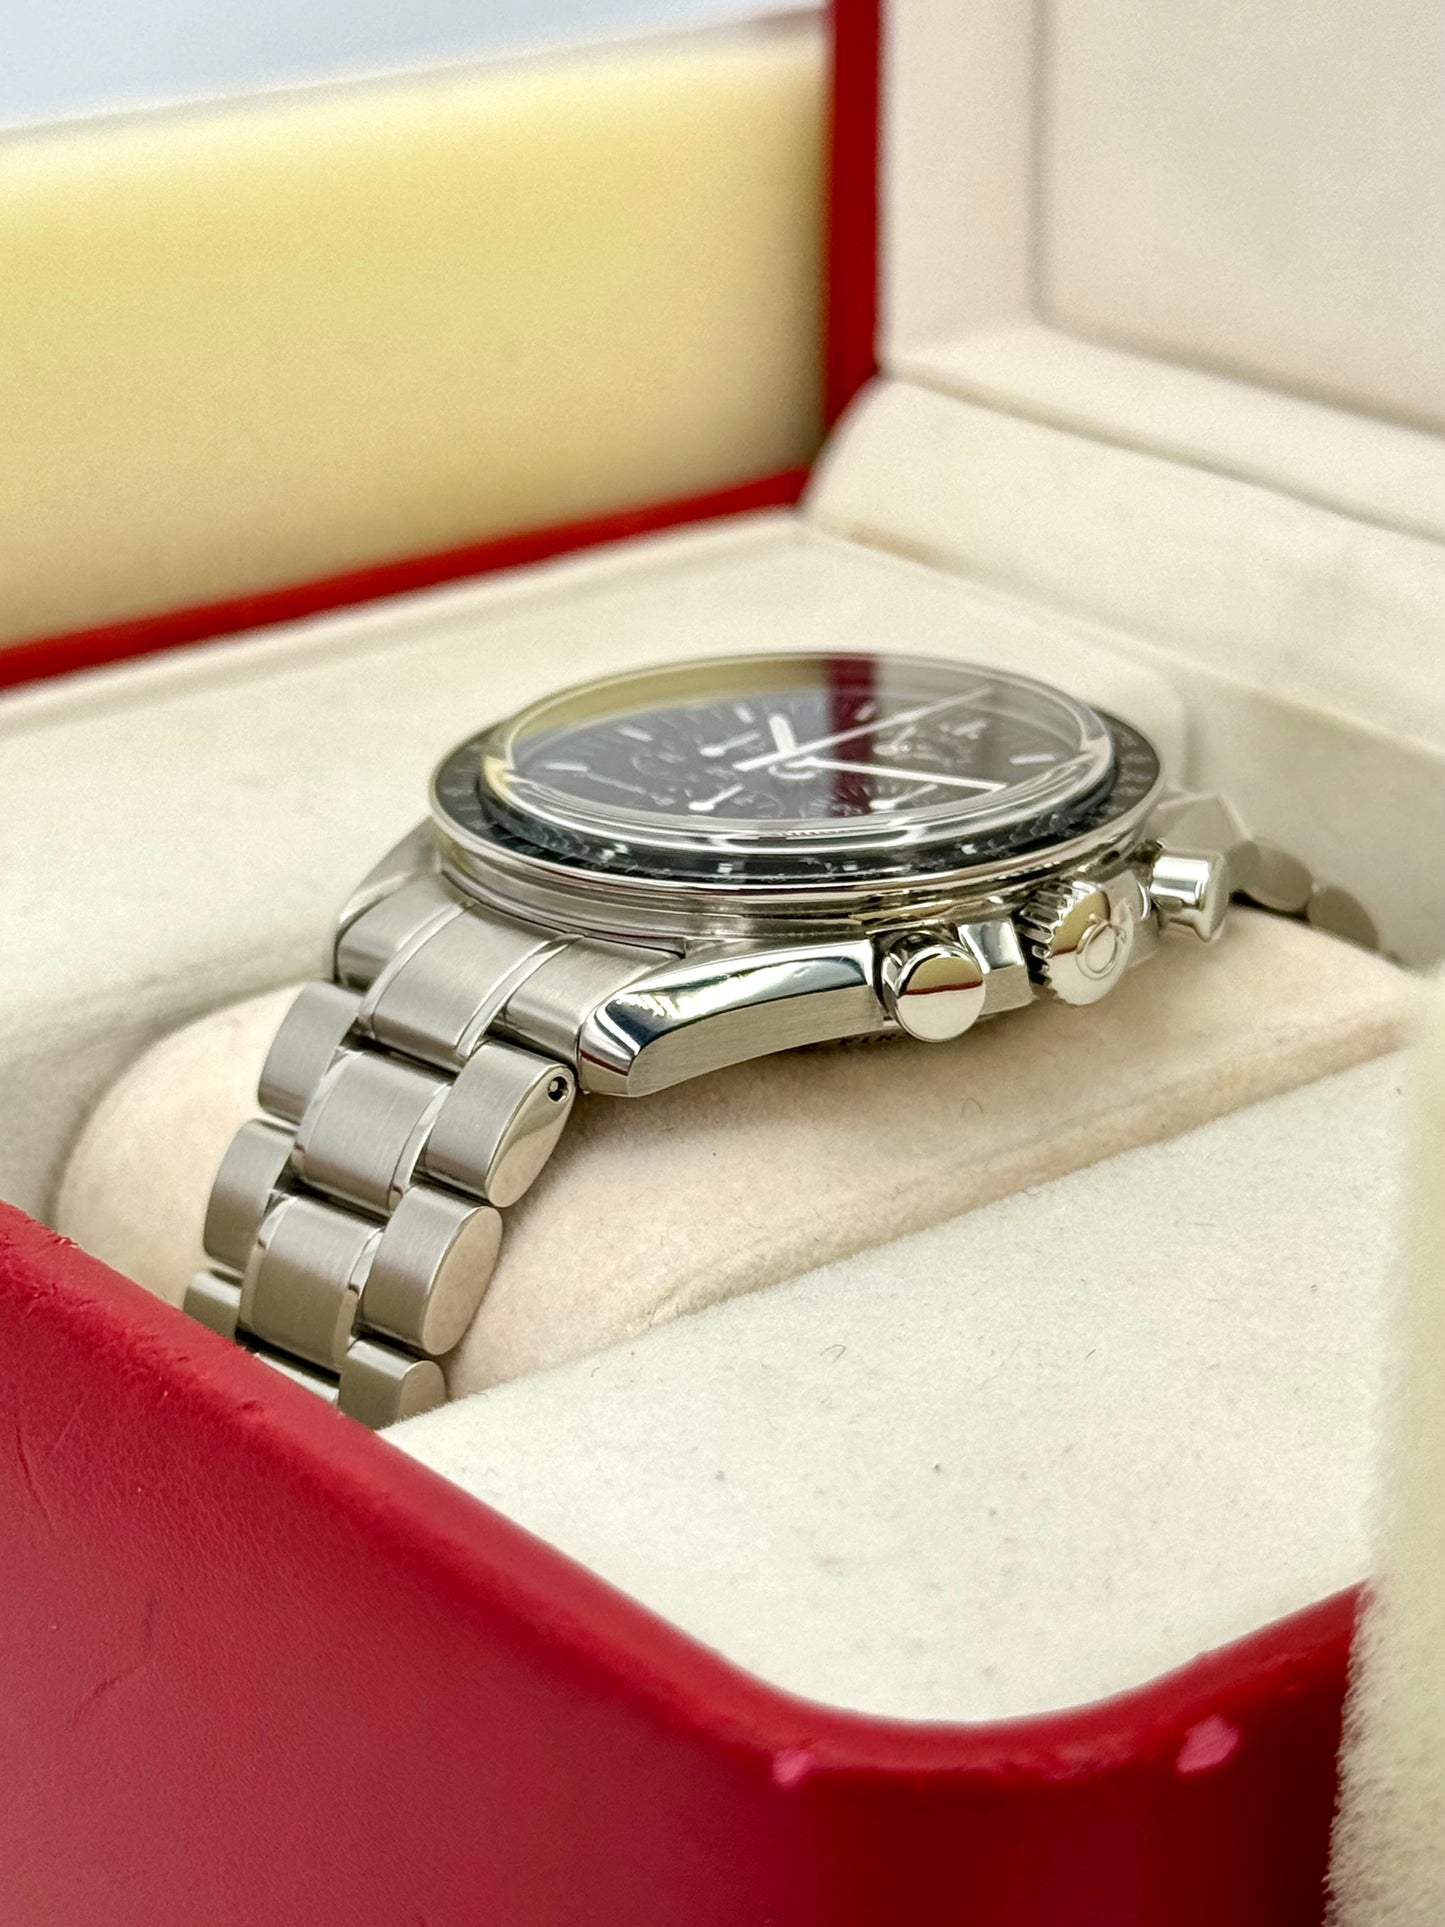 2013 Omega Speedmaster 42mm 3576.50.00 Professional Moonphase - MyWatchLLC